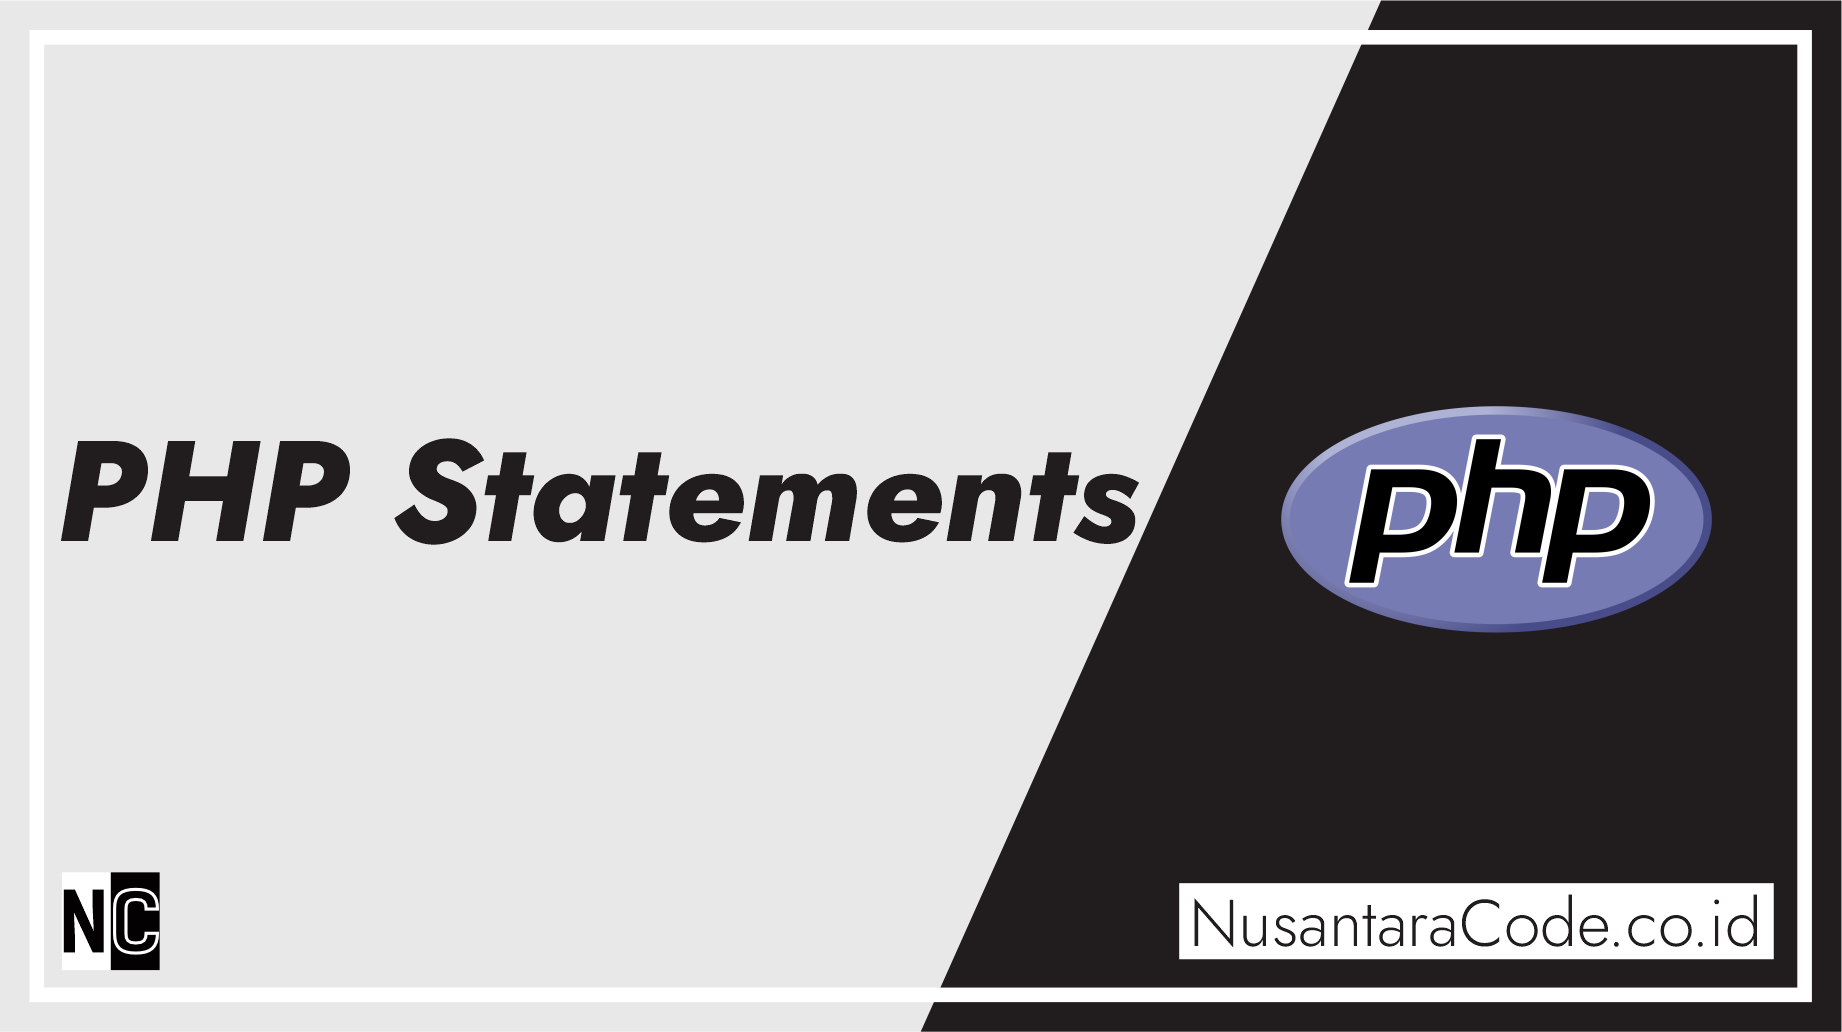 PHP Statements